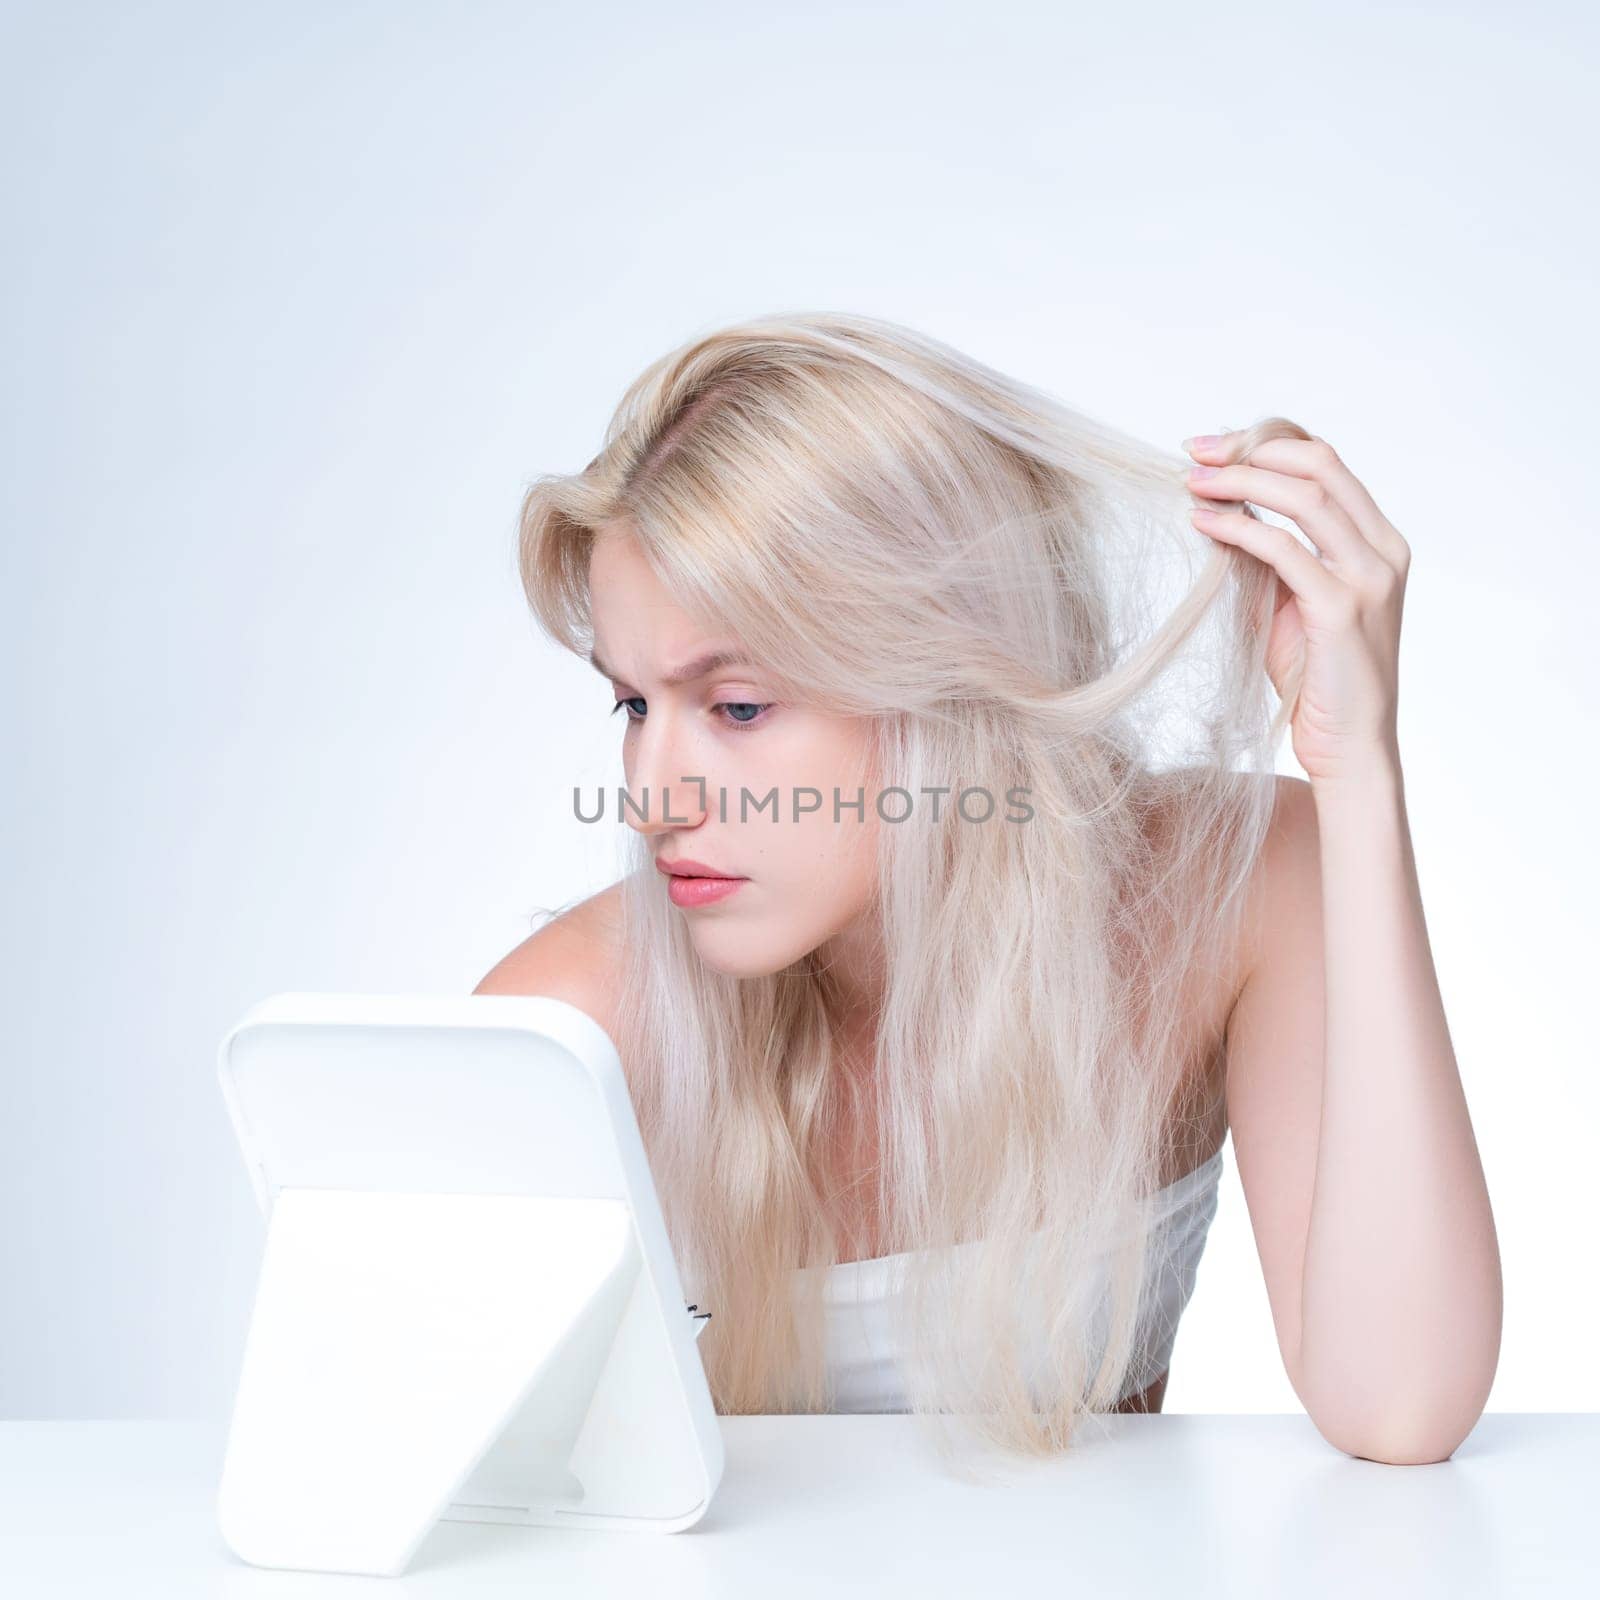 Personable woman with cosmetic skin having dry hair loss problem. by biancoblue